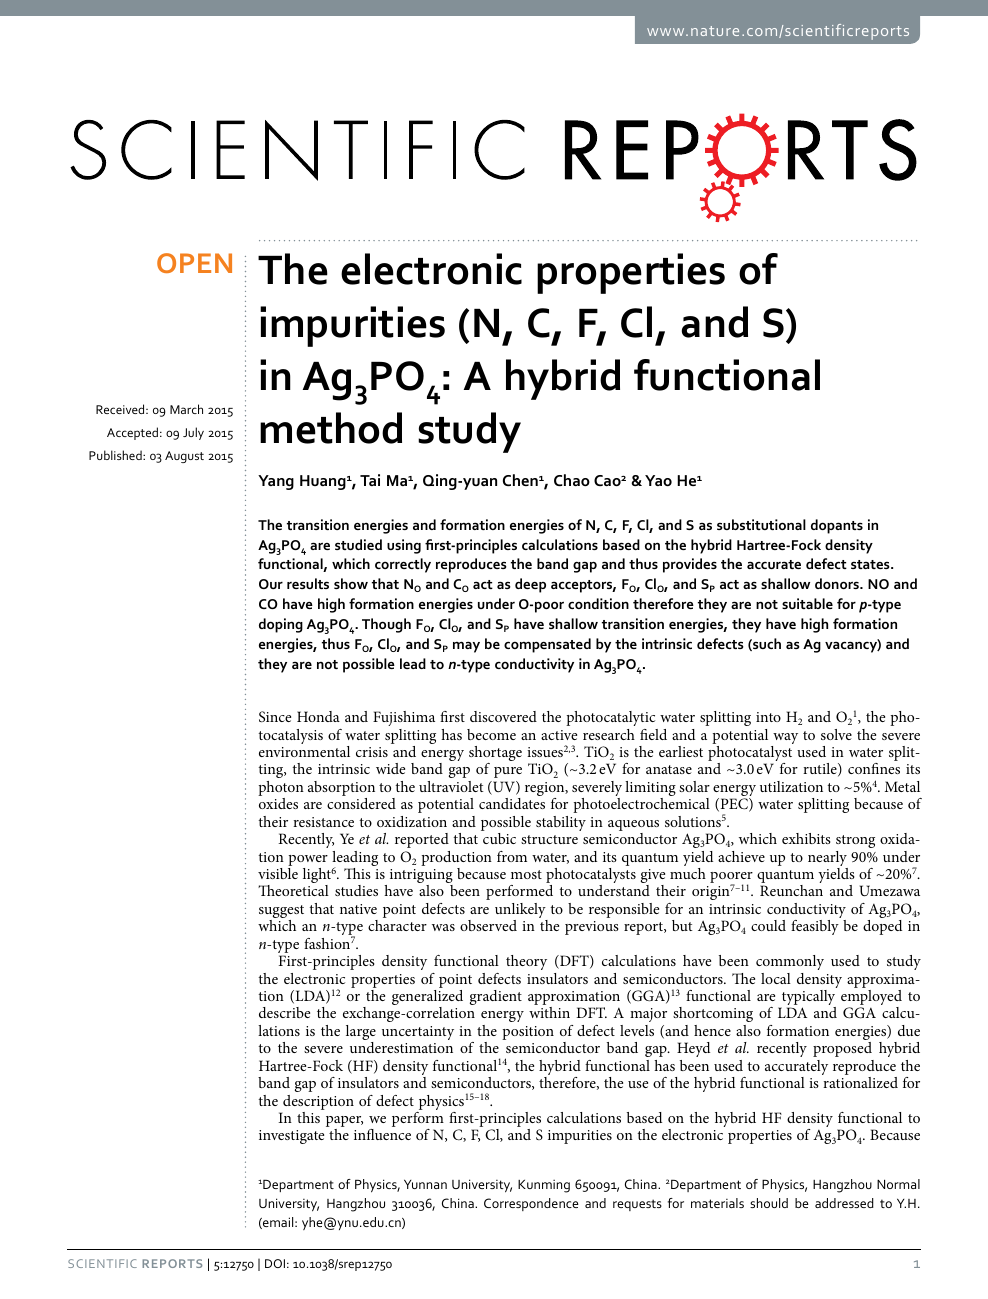 The Electronic Properties Of Impurities N C F Cl And S In Ag3po4 A Hybrid Functional Method Study Topic Of Research Paper In Nano Technology Download Scholarly Article Pdf And Read For